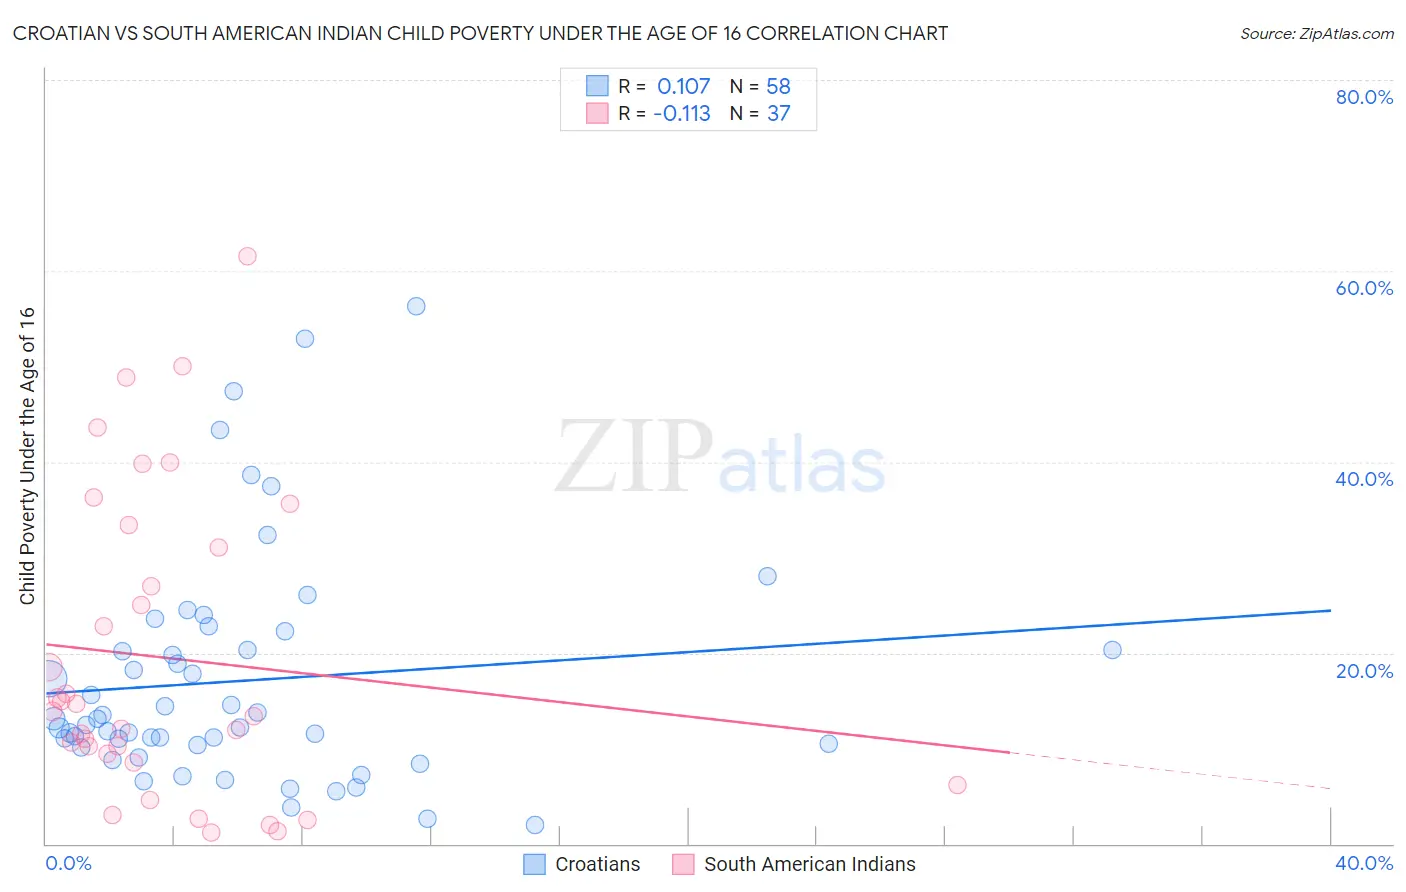 Croatian vs South American Indian Child Poverty Under the Age of 16